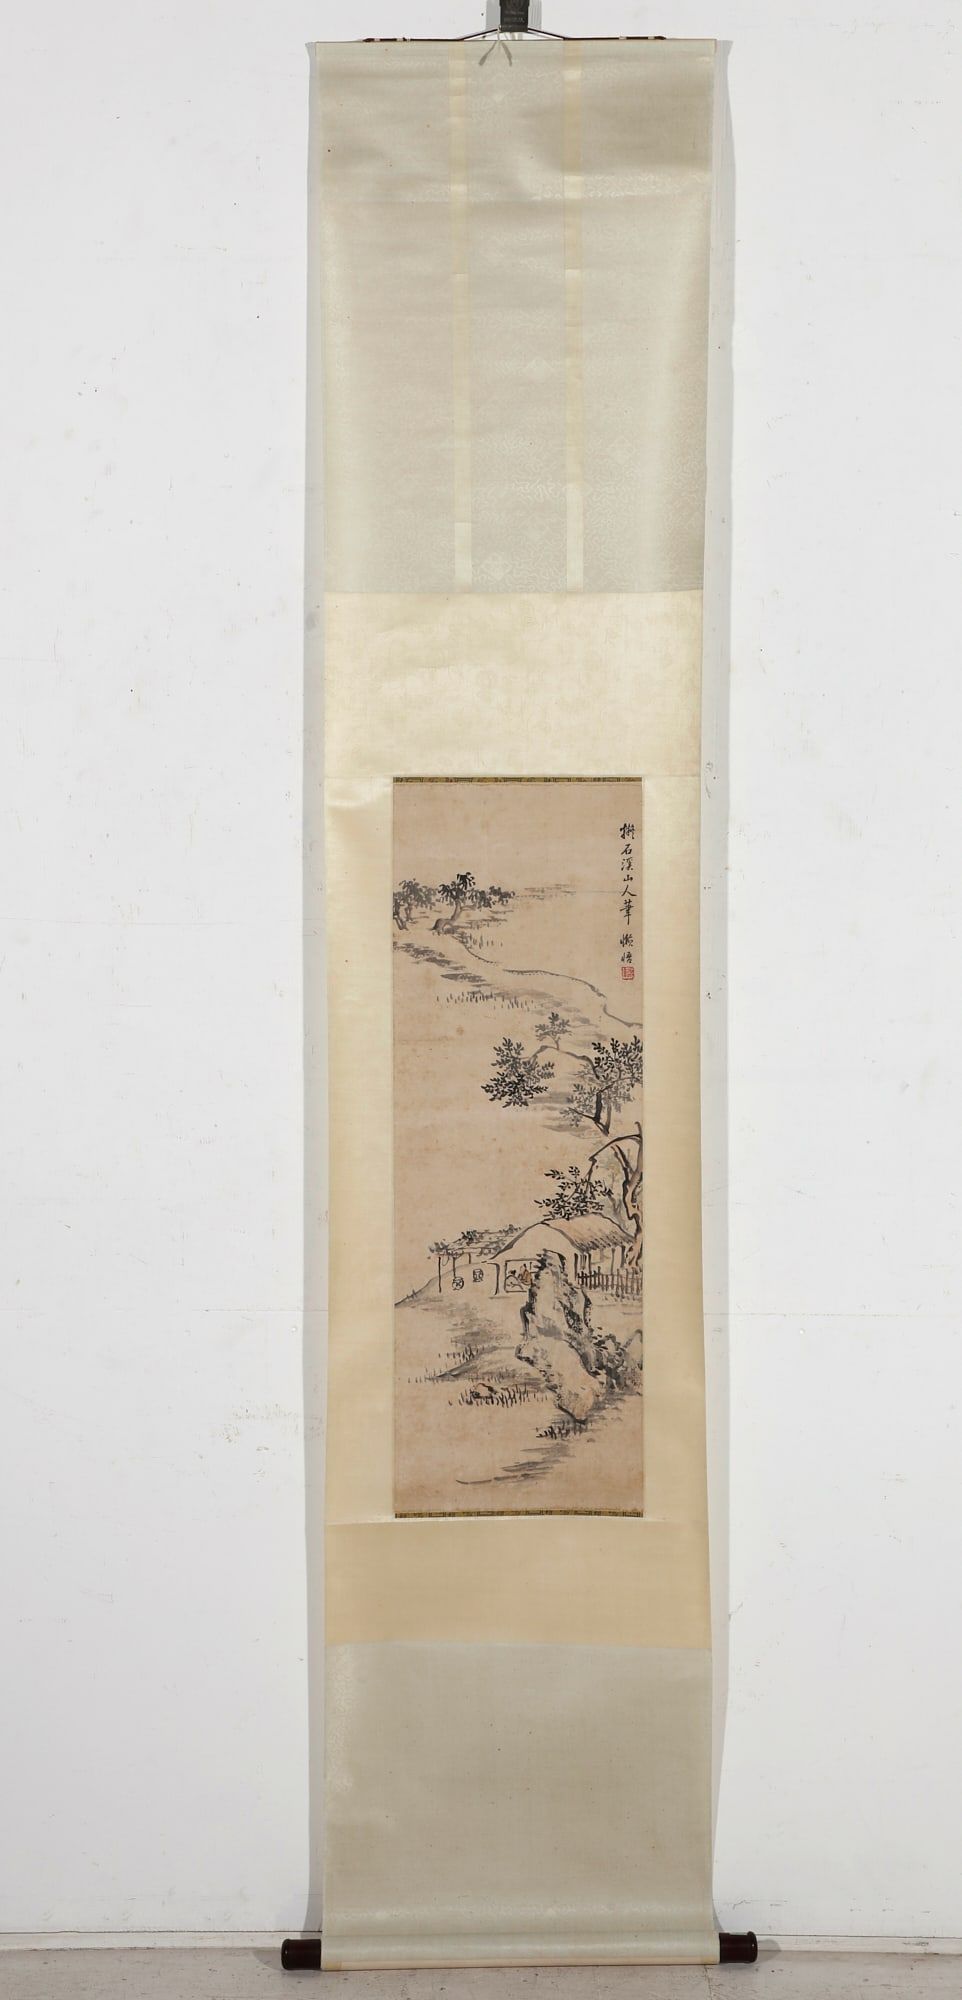 A CHINESE SCROLL DEPICTING A LANDSCAPEA 2fb33fc